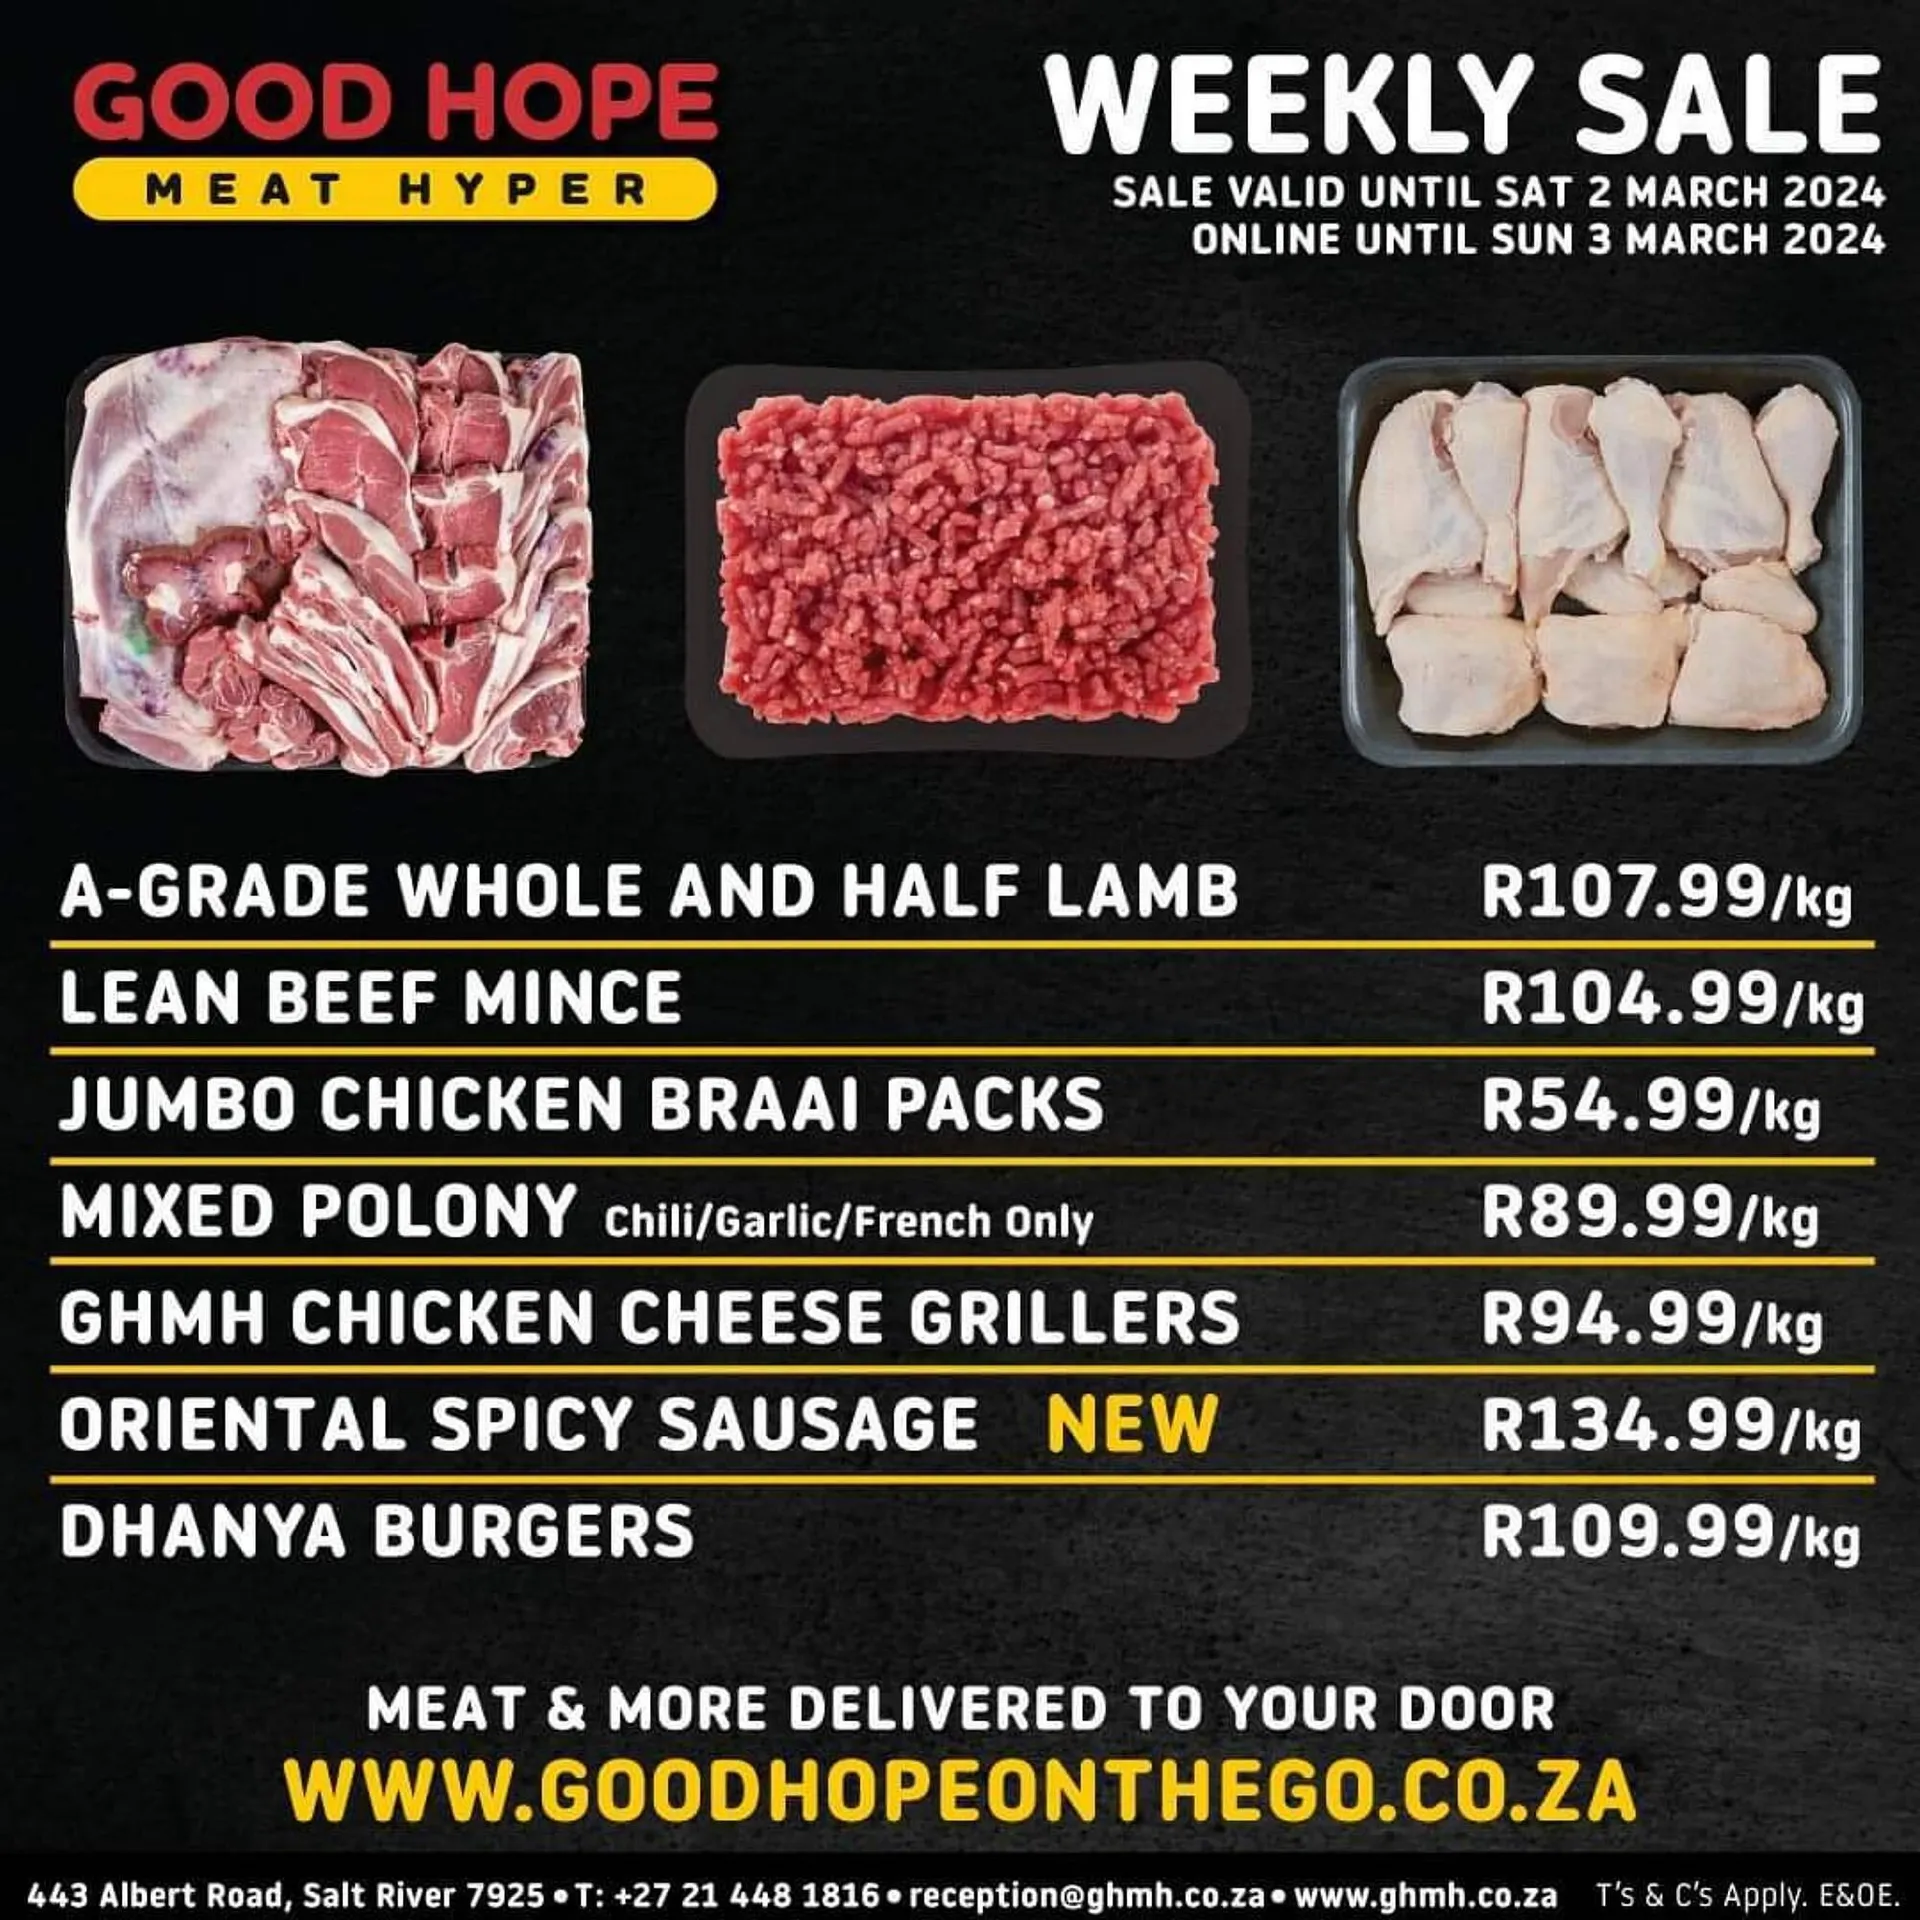 Good Hope Meat Hyper catalogue - 28 February 3 March 2024 - Page 1